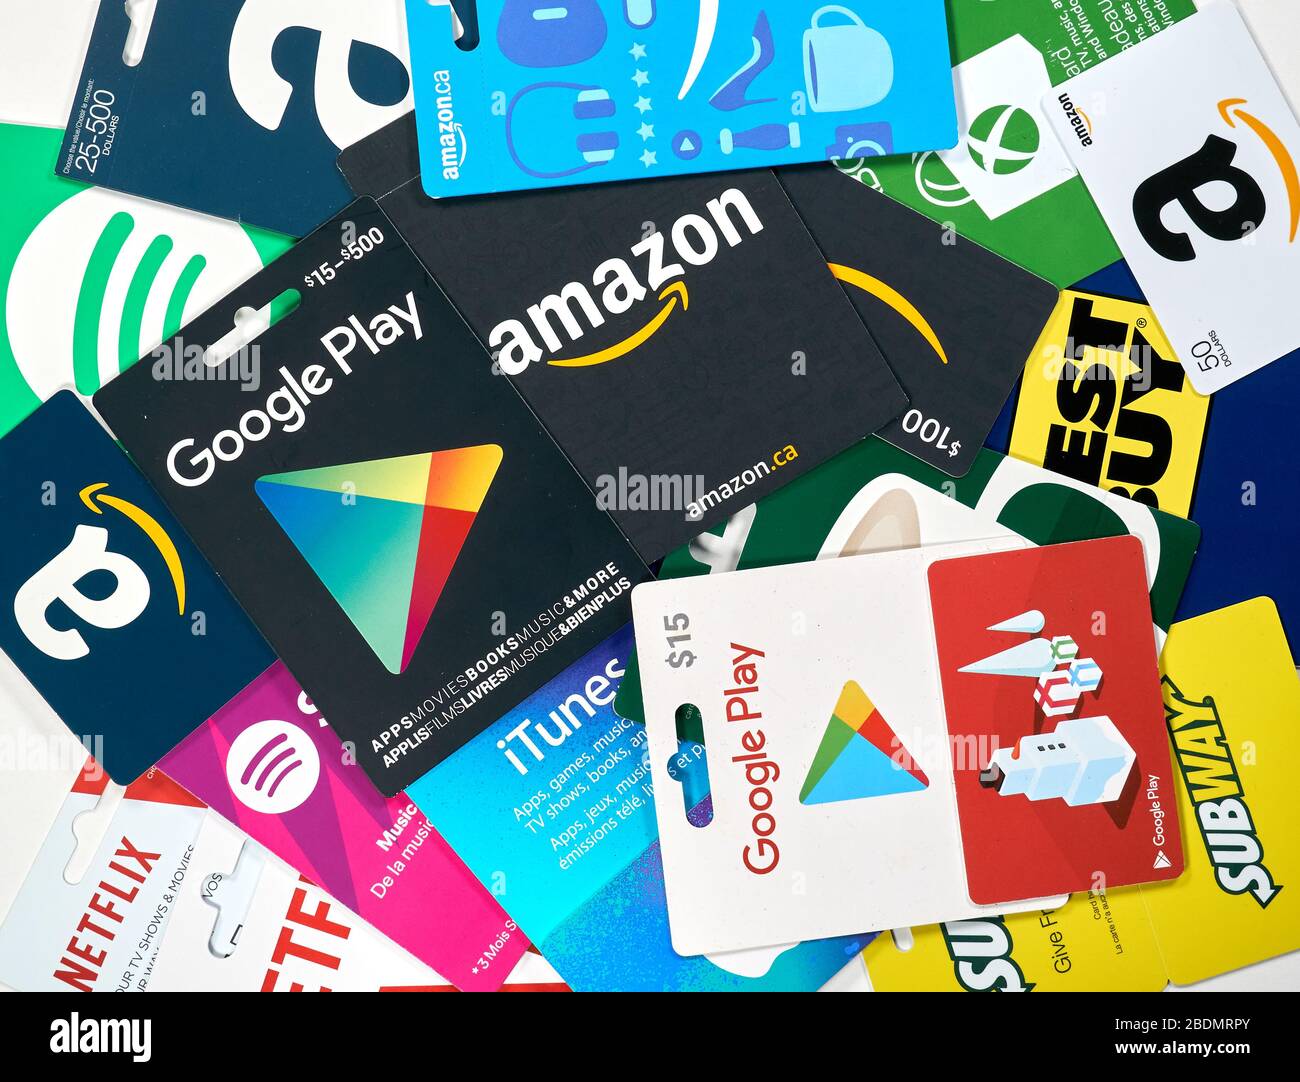 Montreal, Canada - April 6, 2020: Different gift cards of many brands such as Amazon, Netflix, Xbox, Google Play, Best Buy, Spotify. A gift card is a Stock Photo